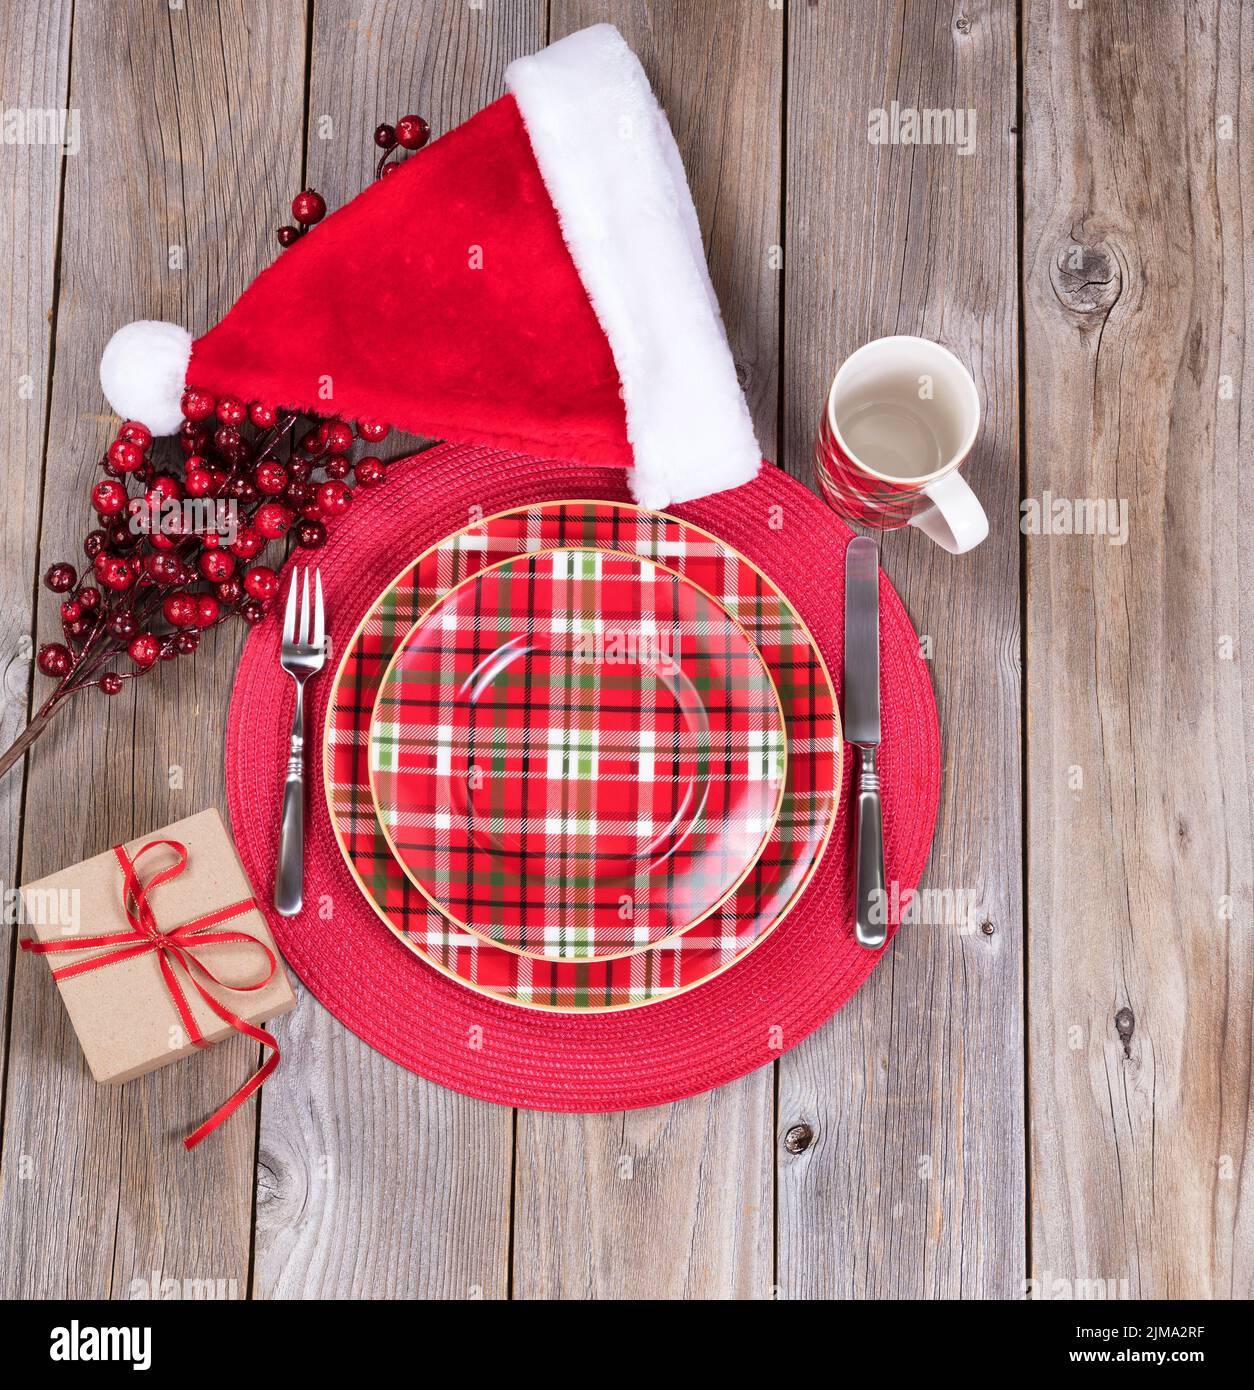 Xmas dinner setting with gift box and Santa cap on rustic wooden boards Stock Photo